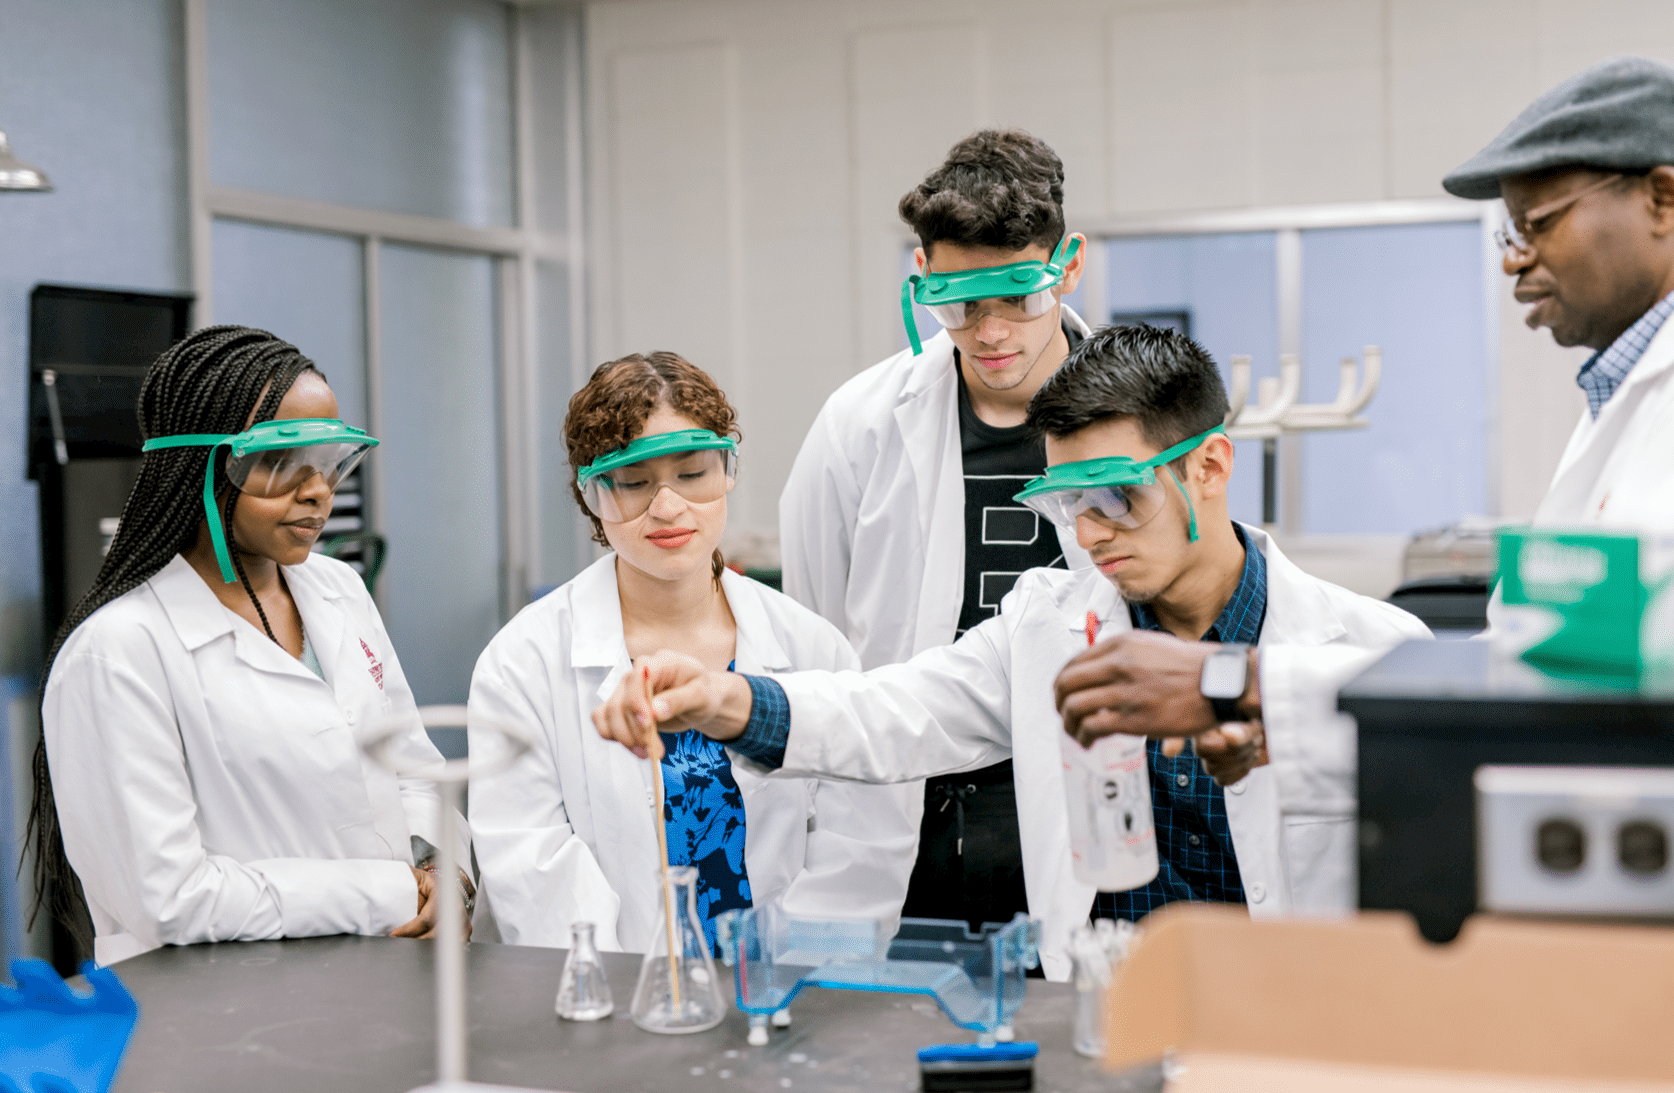 A student begins to mix something in a flask as his peers and professor stand around in observation.